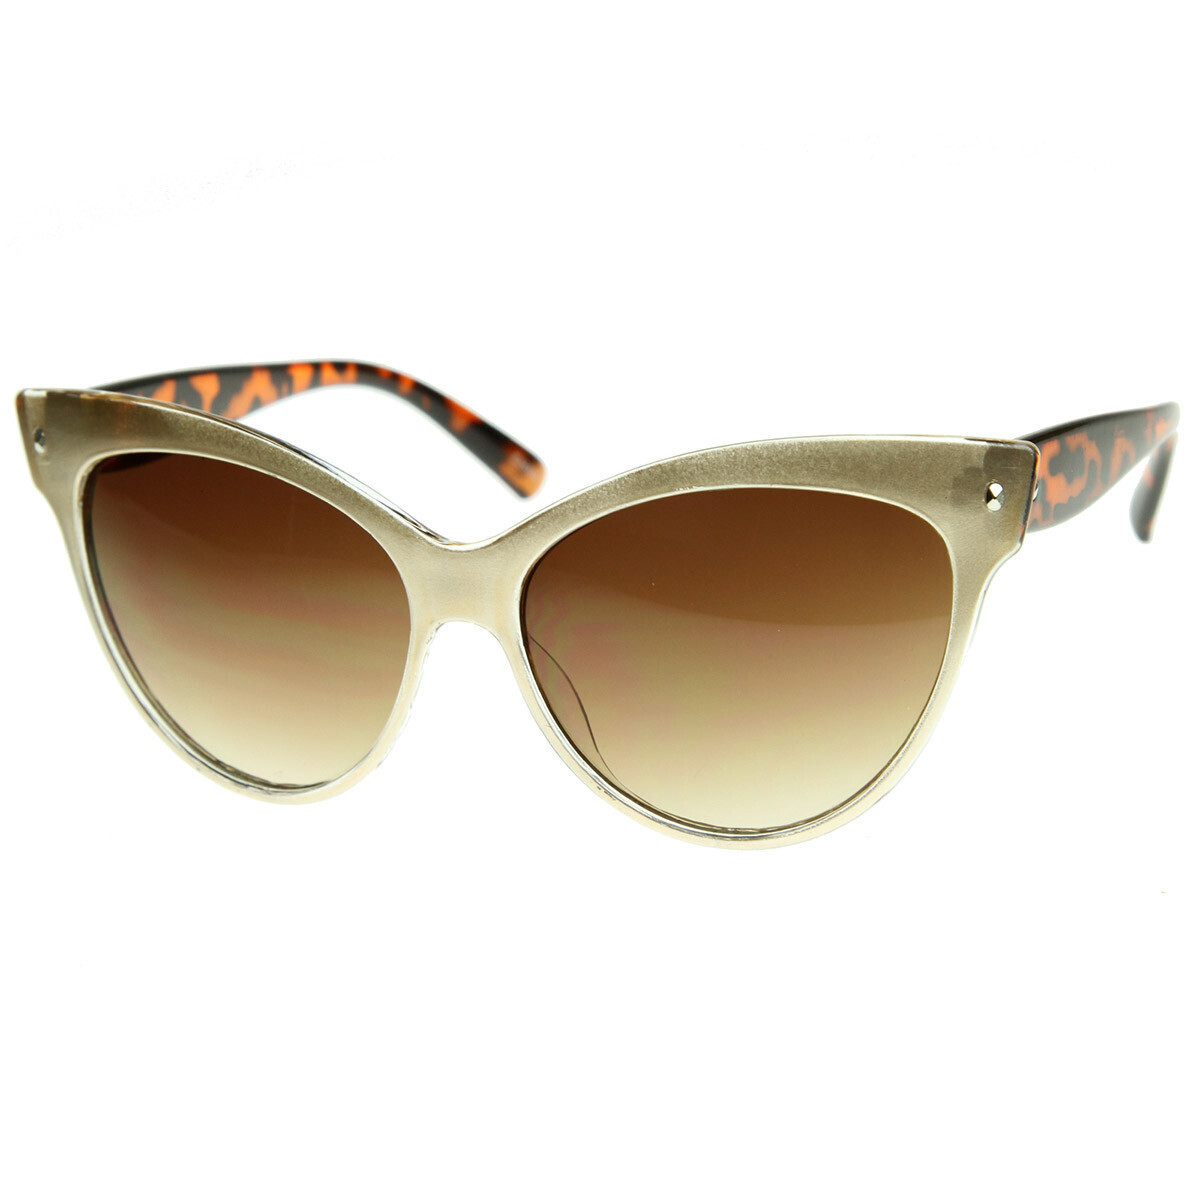 High Pointed Vintage Mod Womens Fashion Cat Eye Sunglasses - 8462 - Gold-Tort